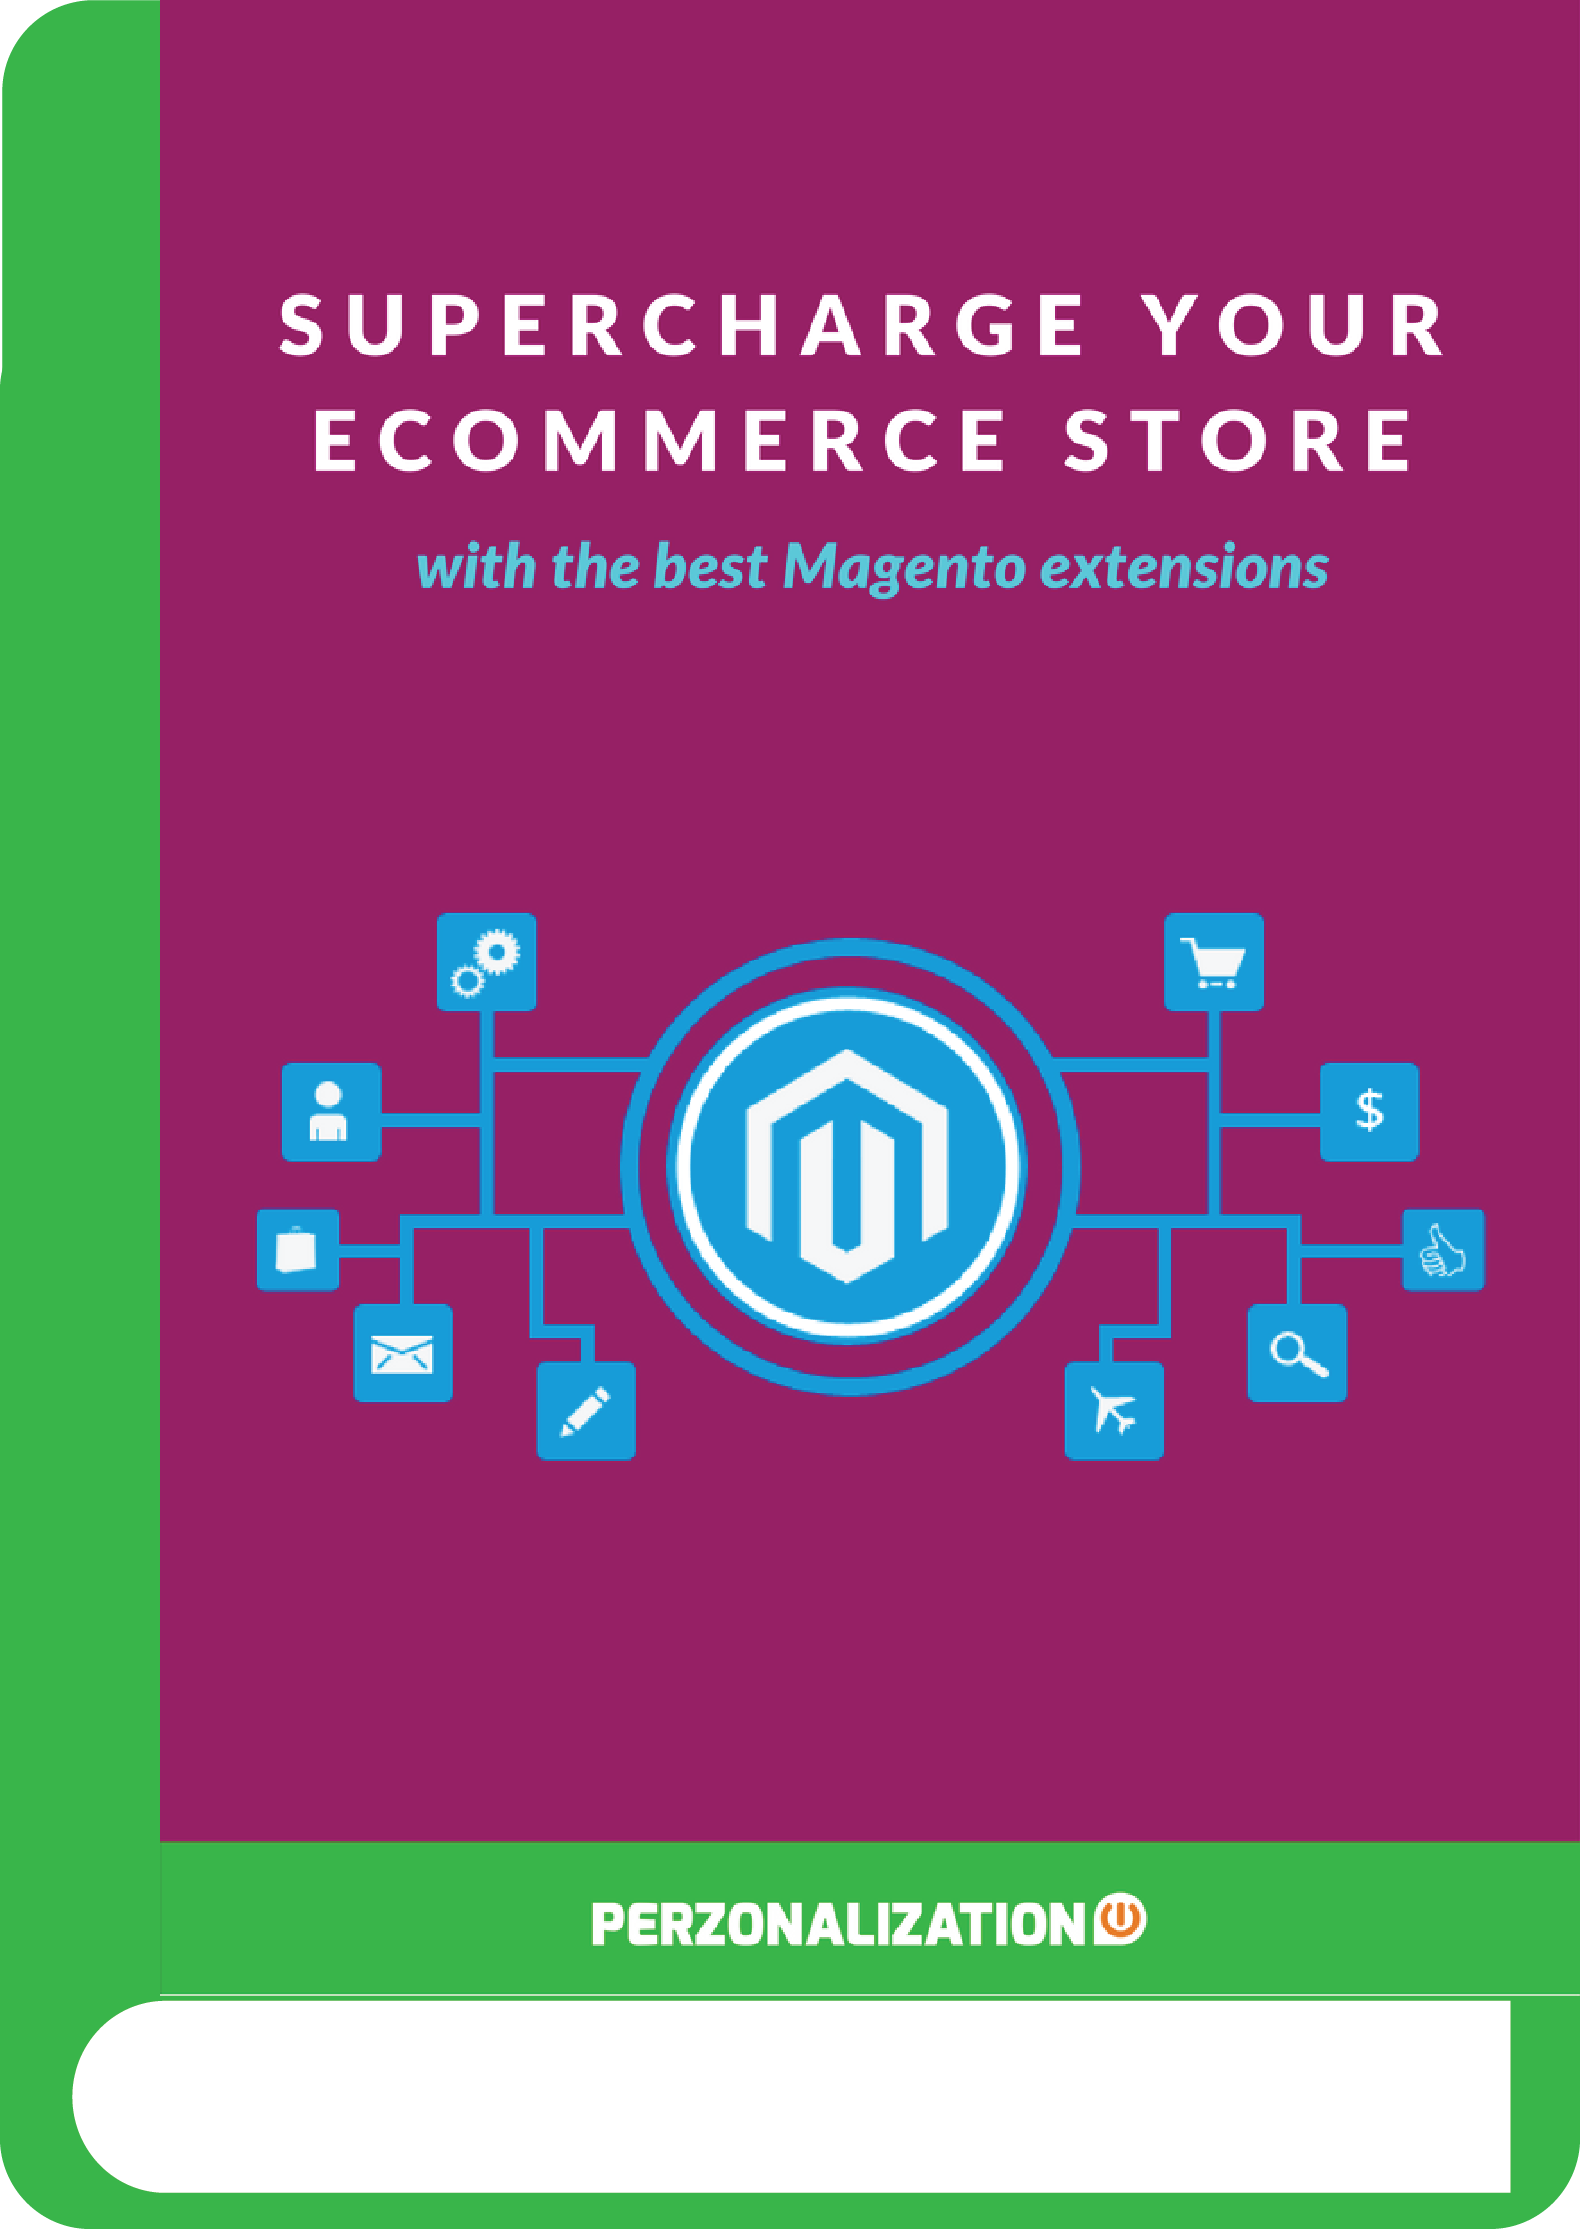 There are several great extensions for Magento that can be easily used for best results. Here, you will get to know about the best Magento extensions.